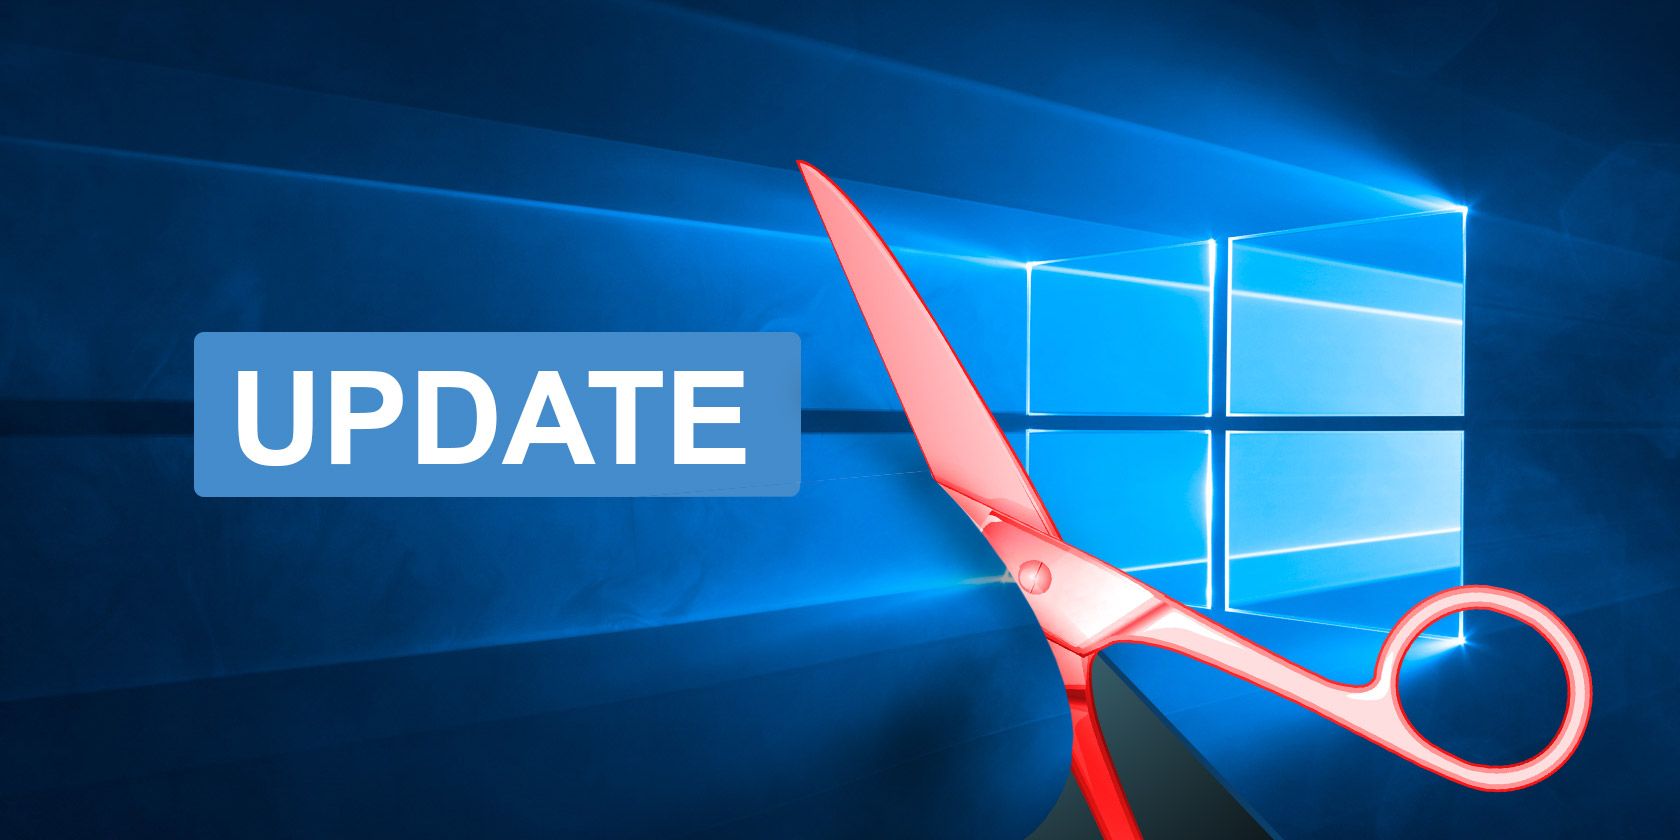 windows 7 automatic update keeps turning off